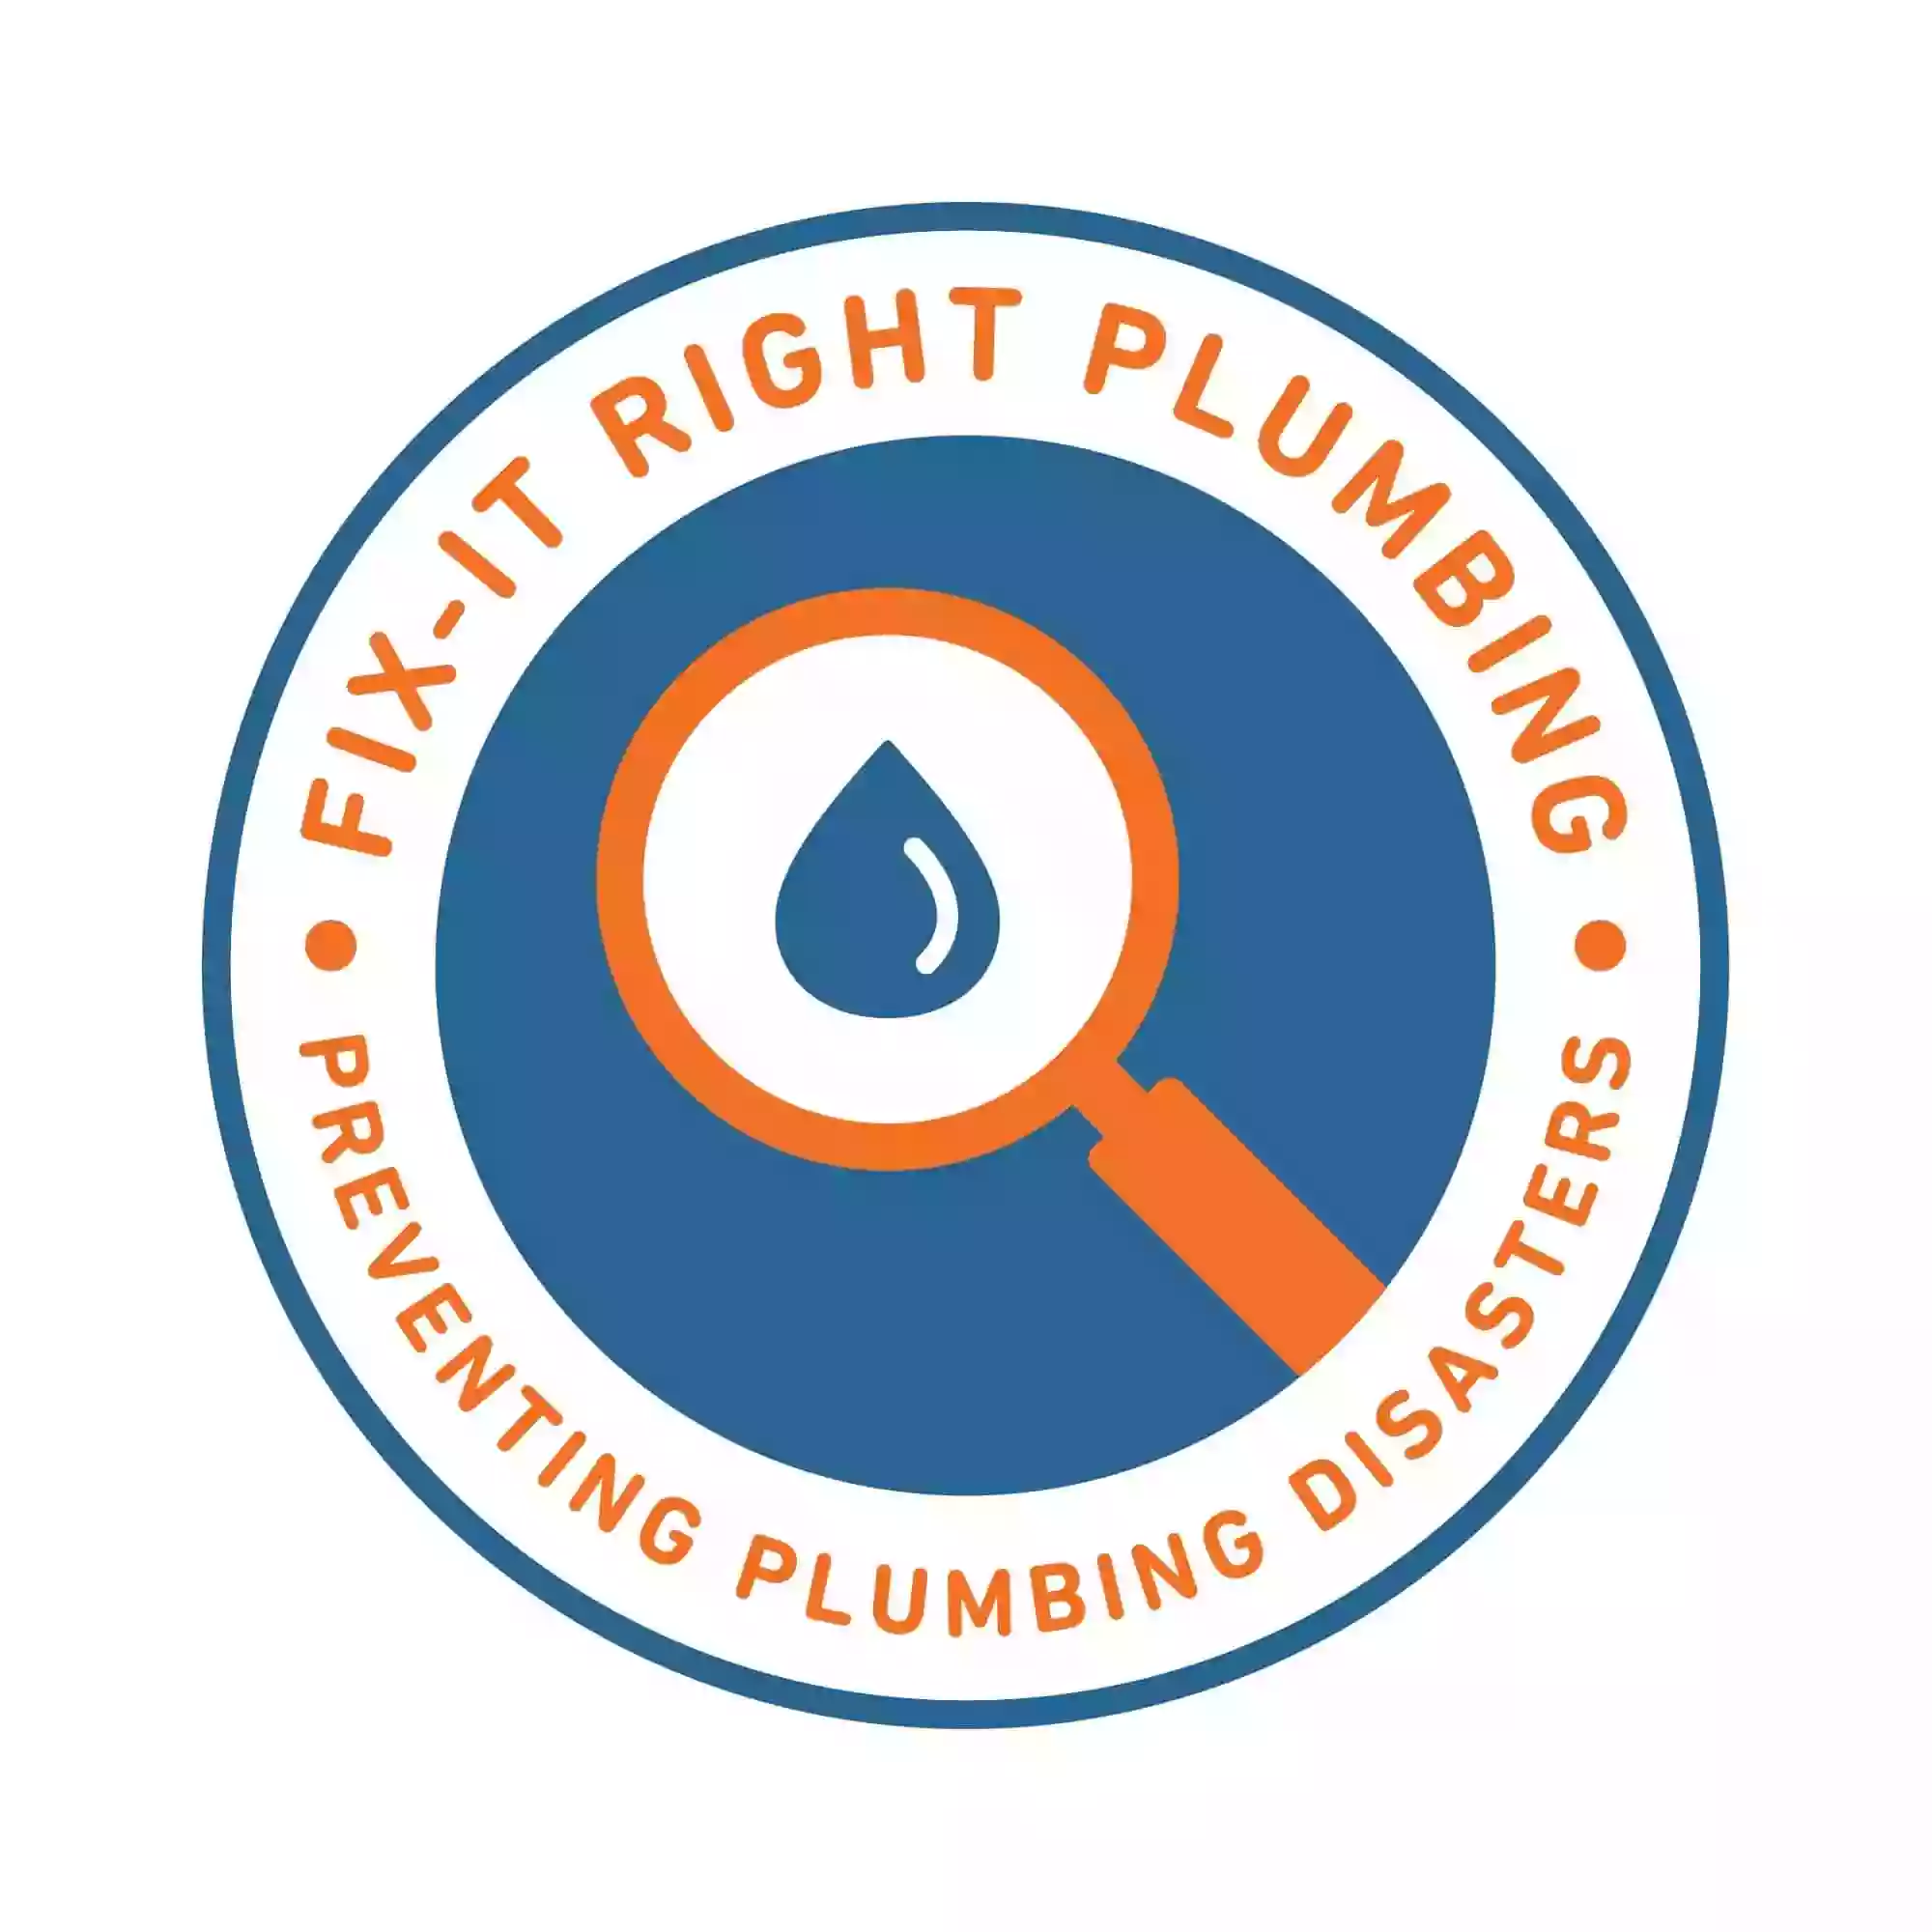 Fix It Right Plumbing Canberra